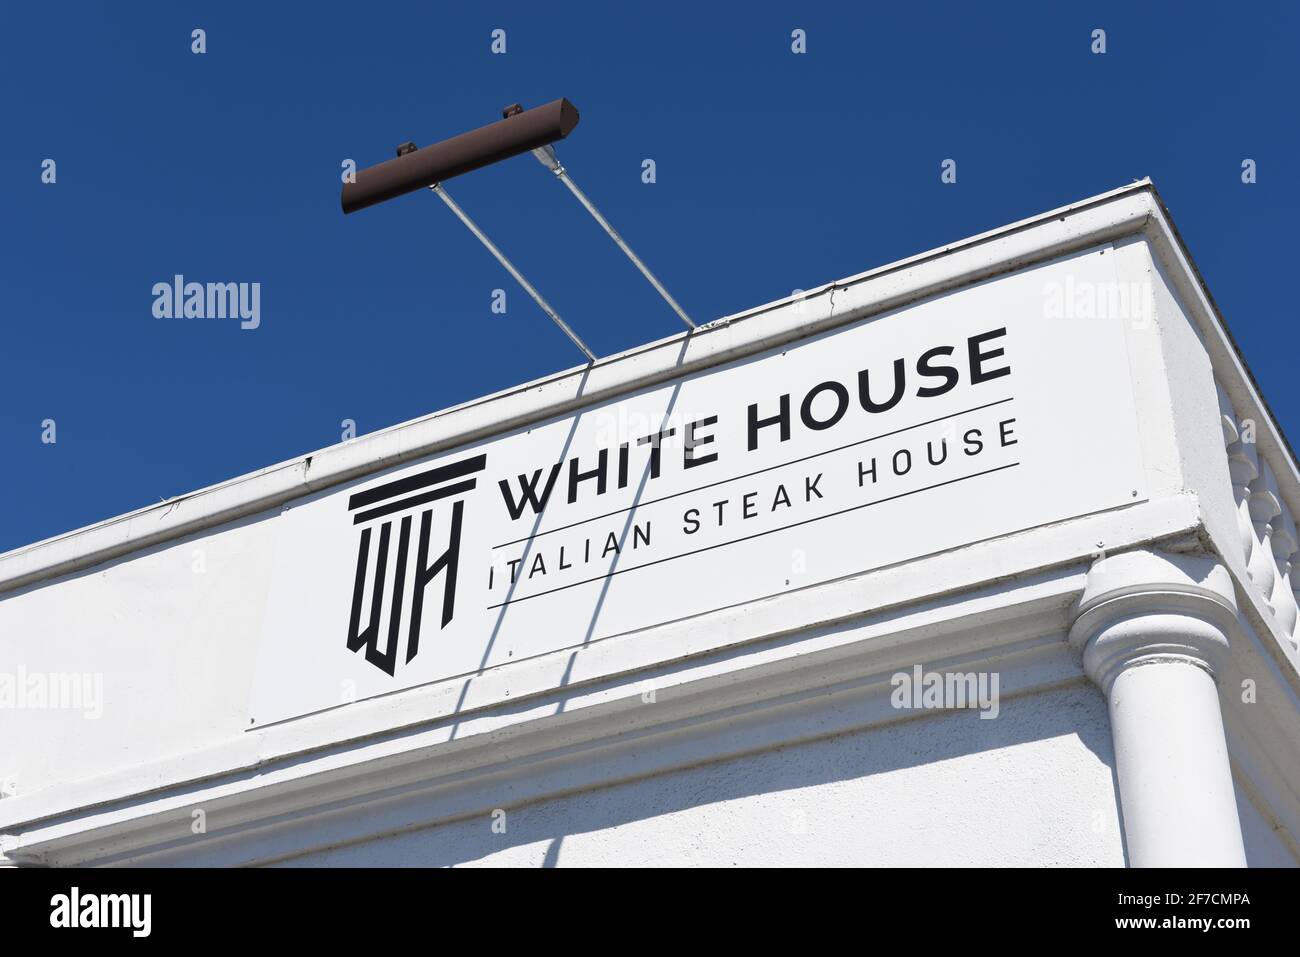 ANAHEIM, CALIFORNIA - 31 MAR 2021: Closeup of the sign on The White House Italian Steak House, by Philanthropist  and Celebrity Chef Sir Bruno Serato. Stock Photo